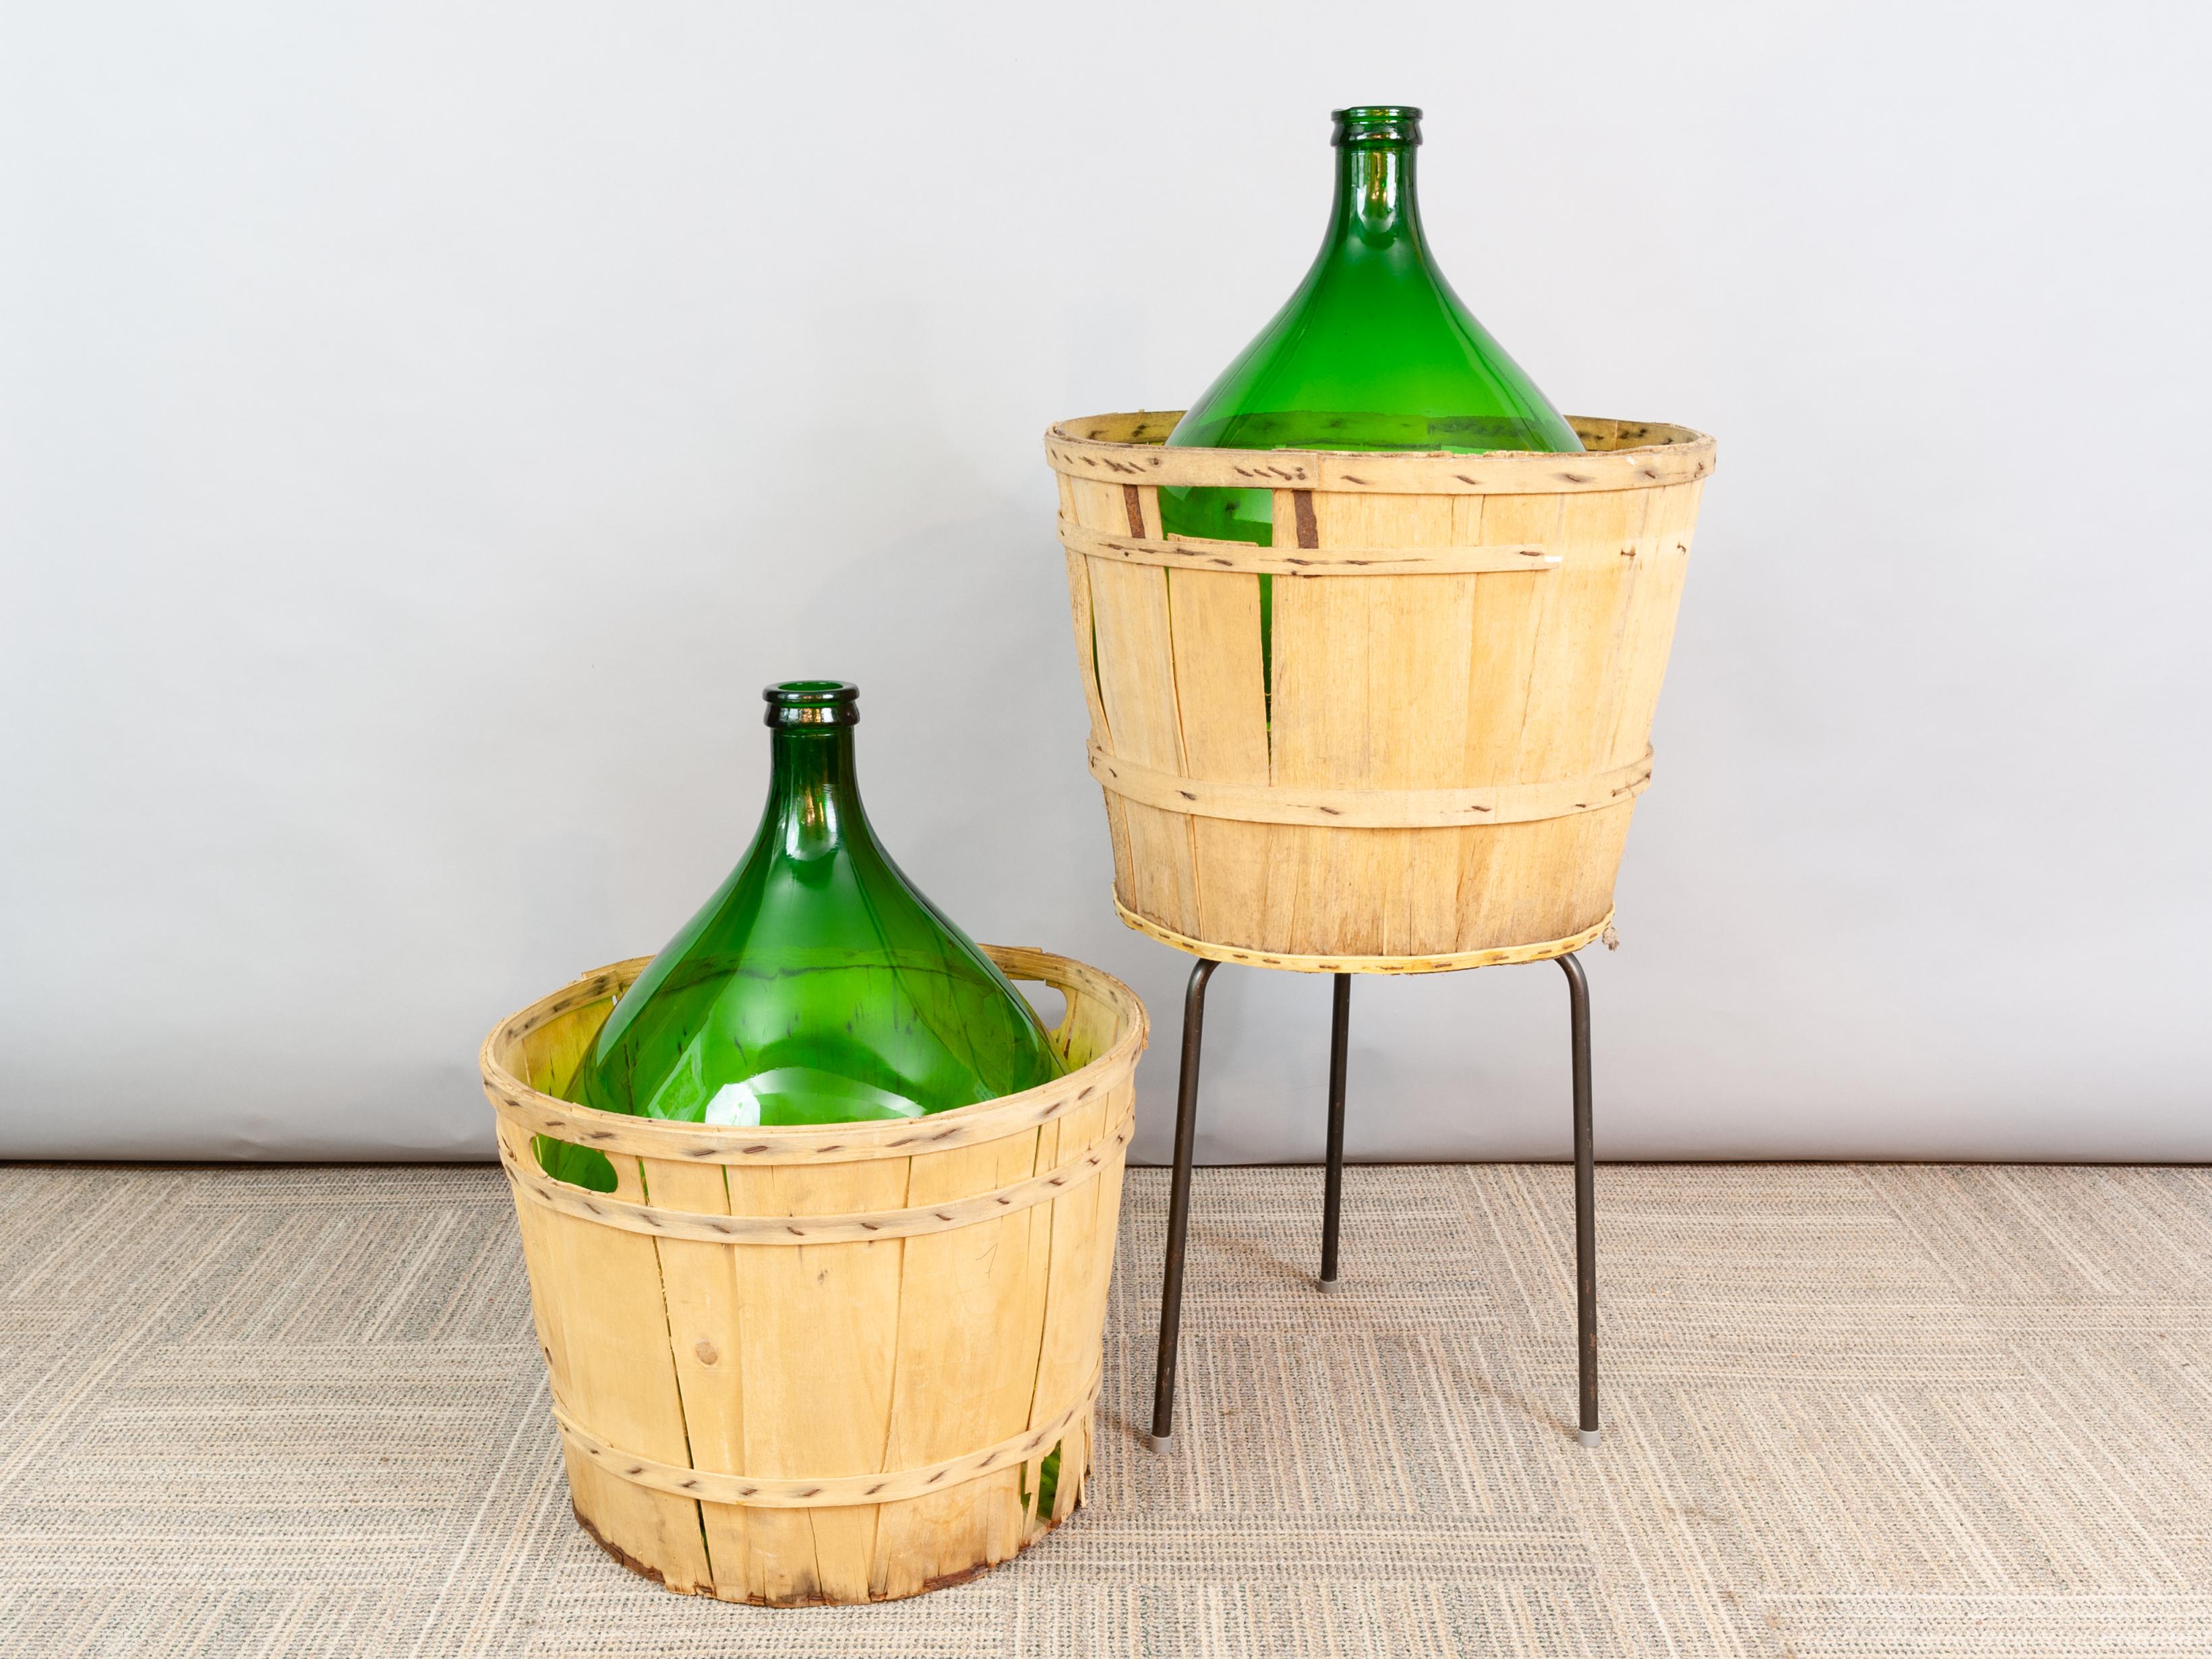 Large French antique emerald green demi-john in its original wooden carrying basket. The bottle can be used for decorative purposes only or for the storing of wine or perhaps olives. They make a wonderful centre-pieces for a large table display,